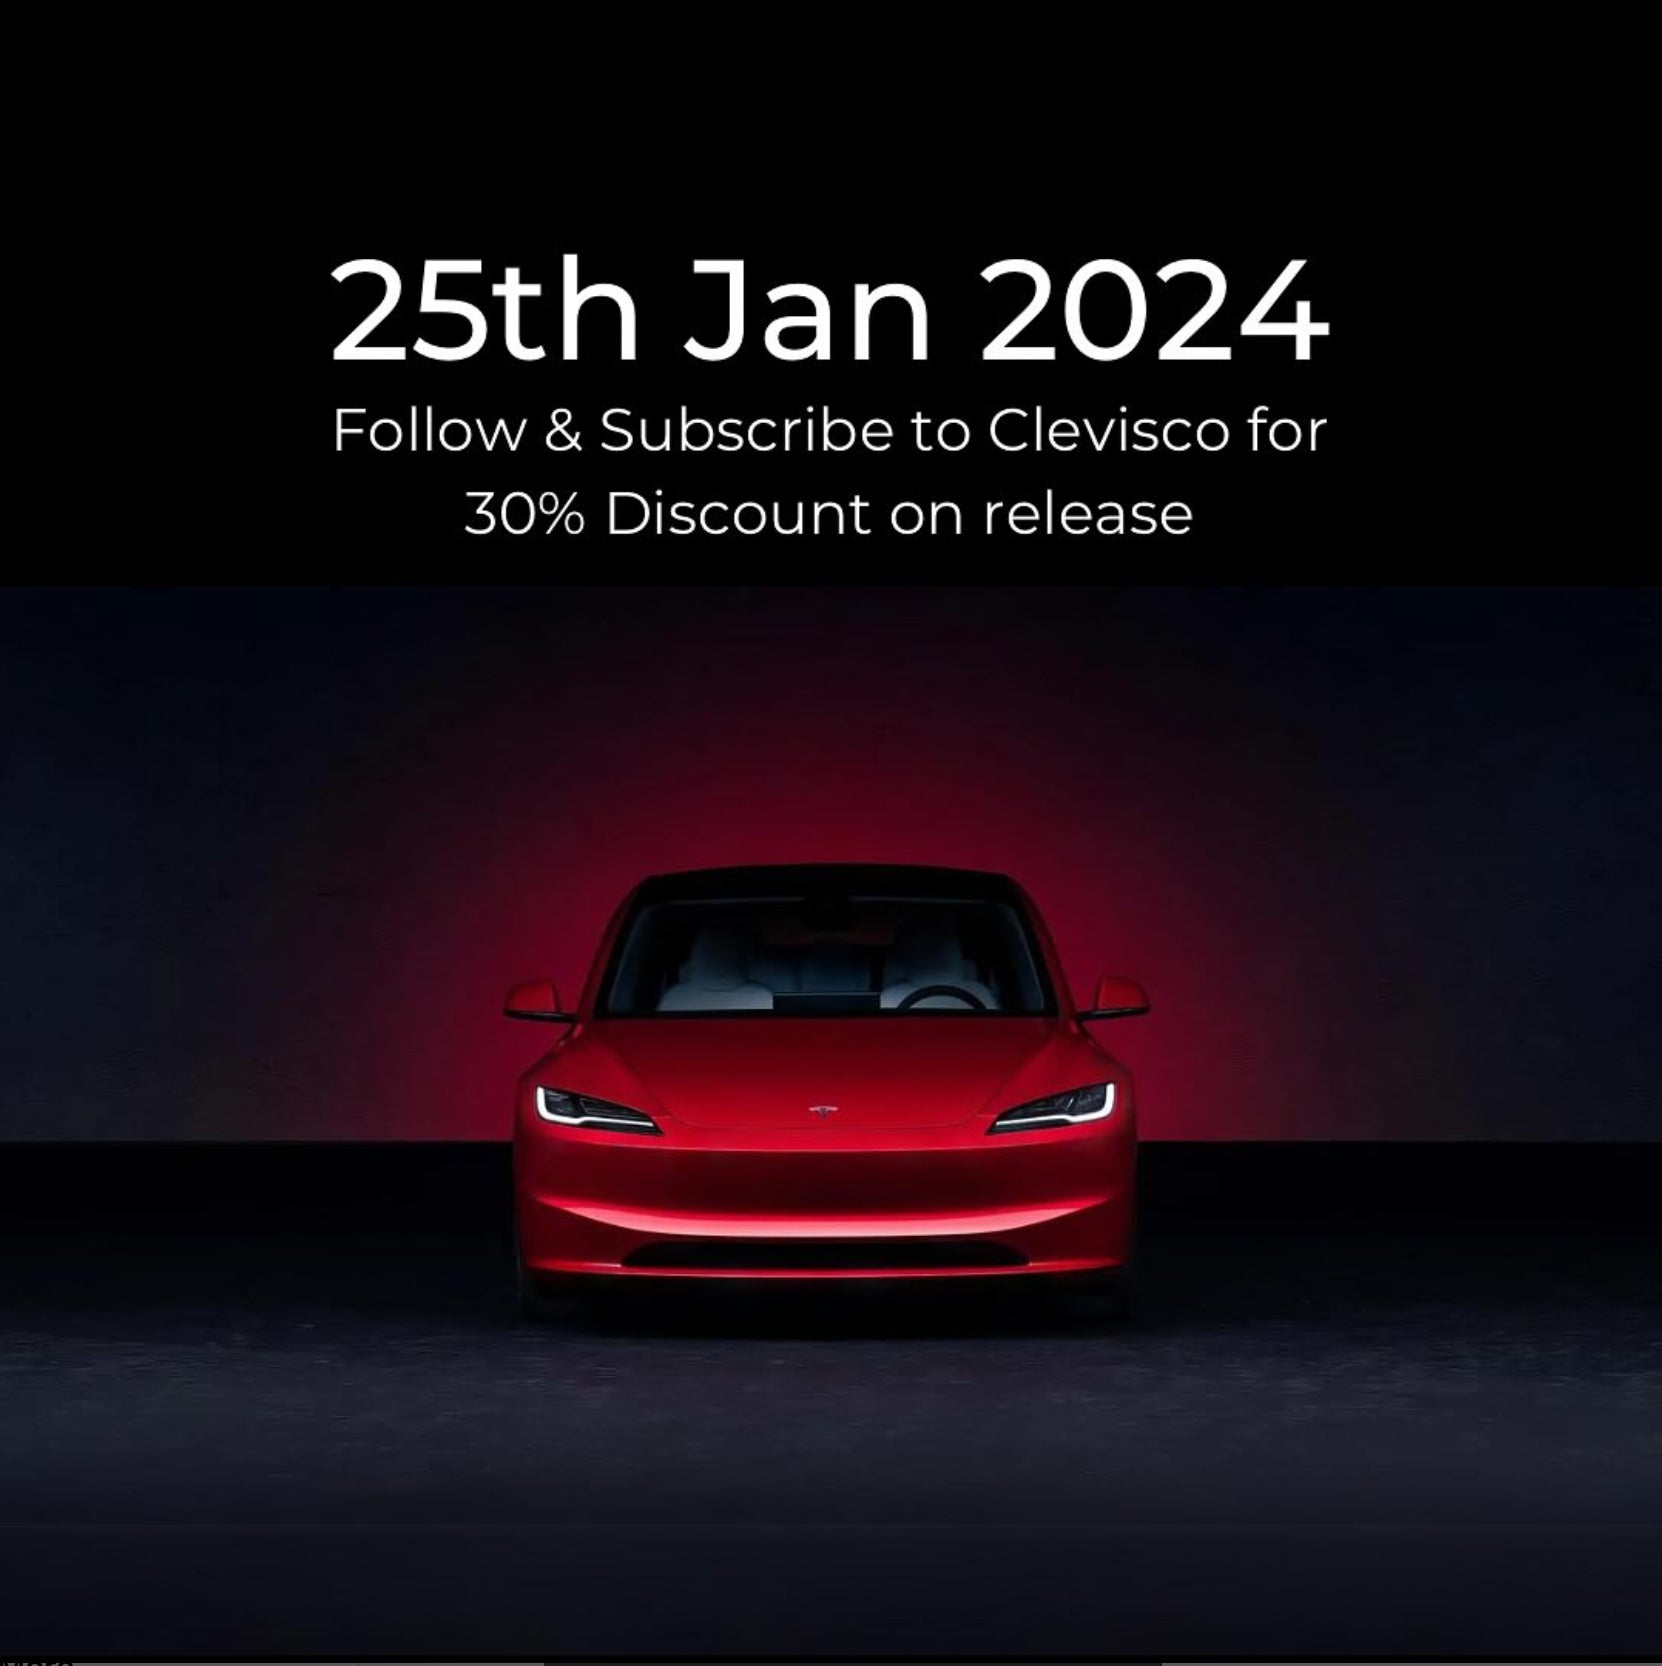 In the center of the image there is a Red Tesla Model 3 2nd generation illuminated in a dark environment with a text written in white that says 25th January 2024 follow and subscribe to clevisco for 30% discount on release